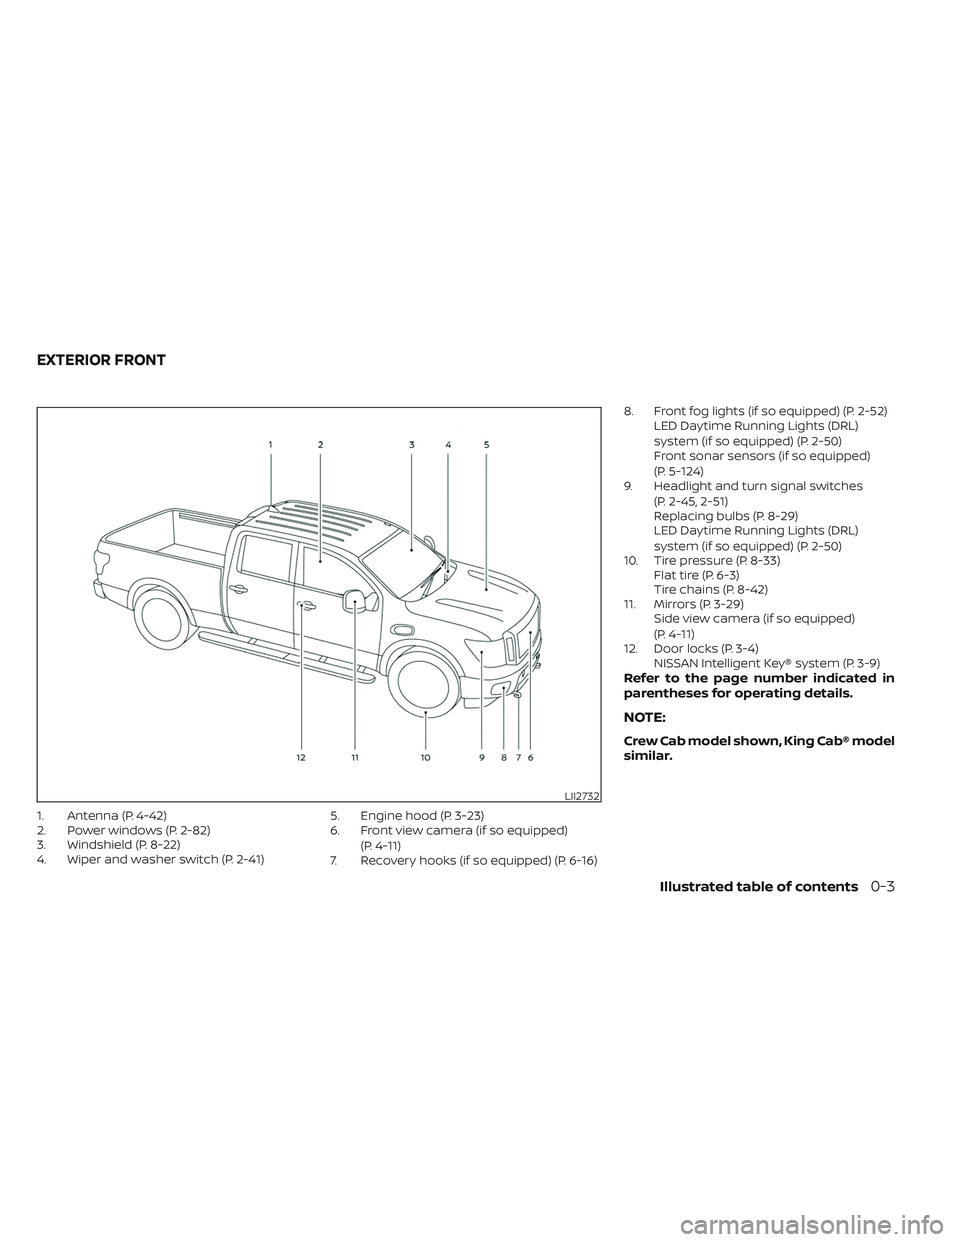 NISSAN TITAN 2022  Owners Manual 1. Antenna (P. 4-42)
2. Power windows (P. 2-82)
3. Windshield (P. 8-22)
4. Wiper and washer switch (P. 2-41)5. Engine hood (P. 3-23)
6. Front view camera (if so equipped)
(P. 4-11)
7. Recovery hooks (